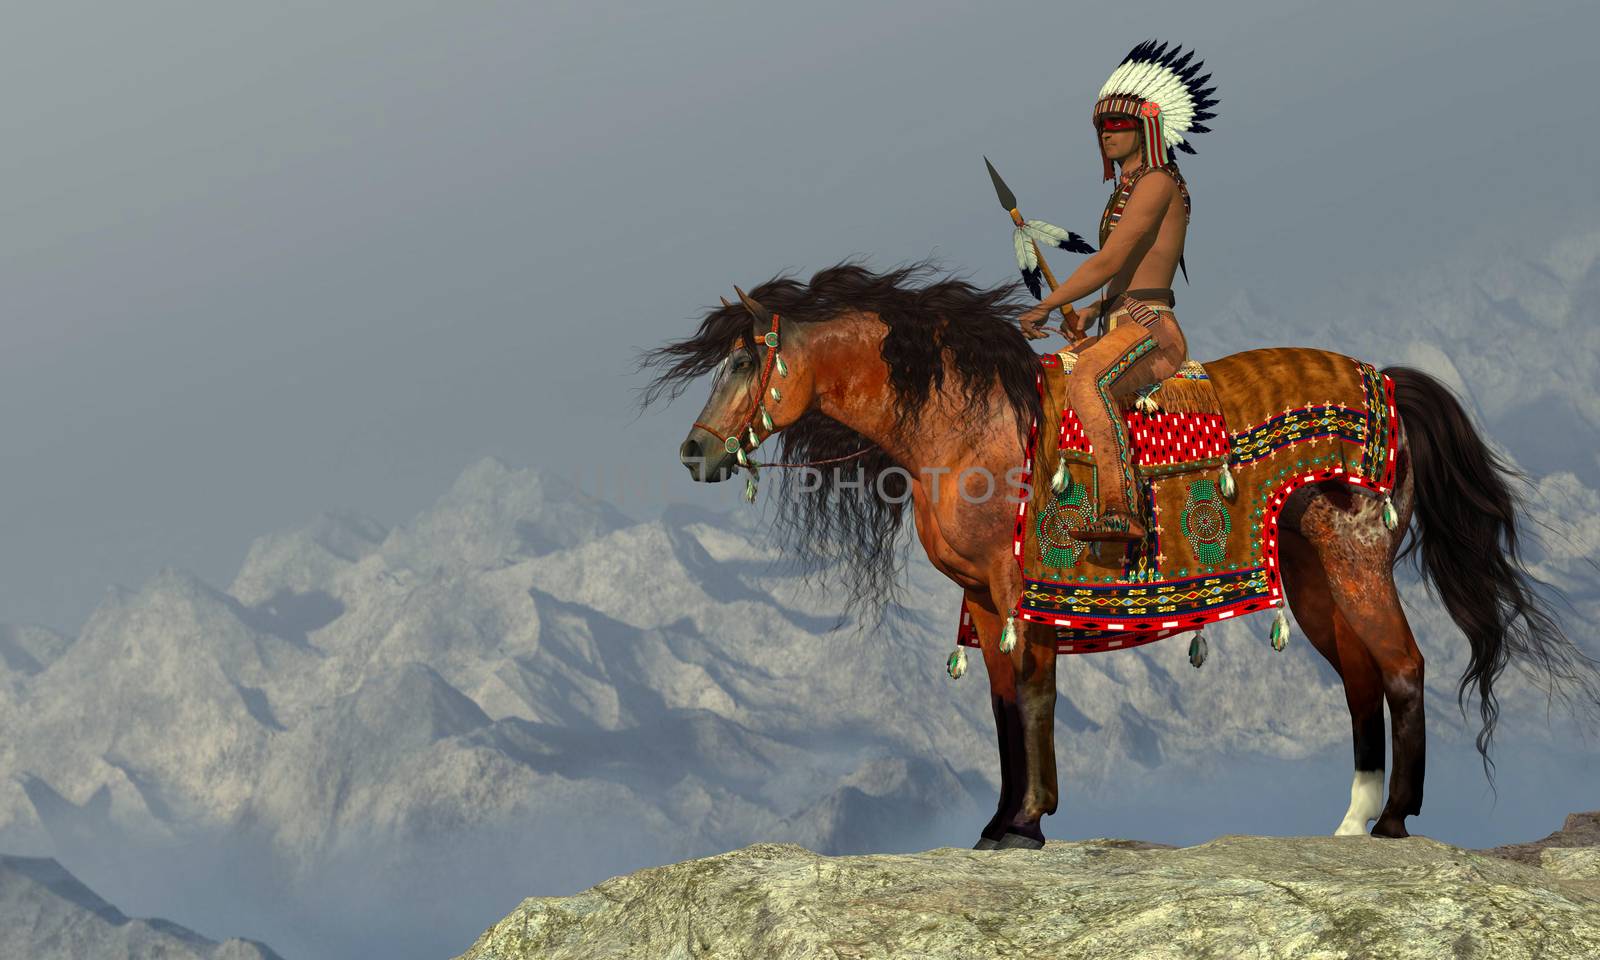 An American Indian sits on his Appaloosa horse on a high cliff in a desert area.